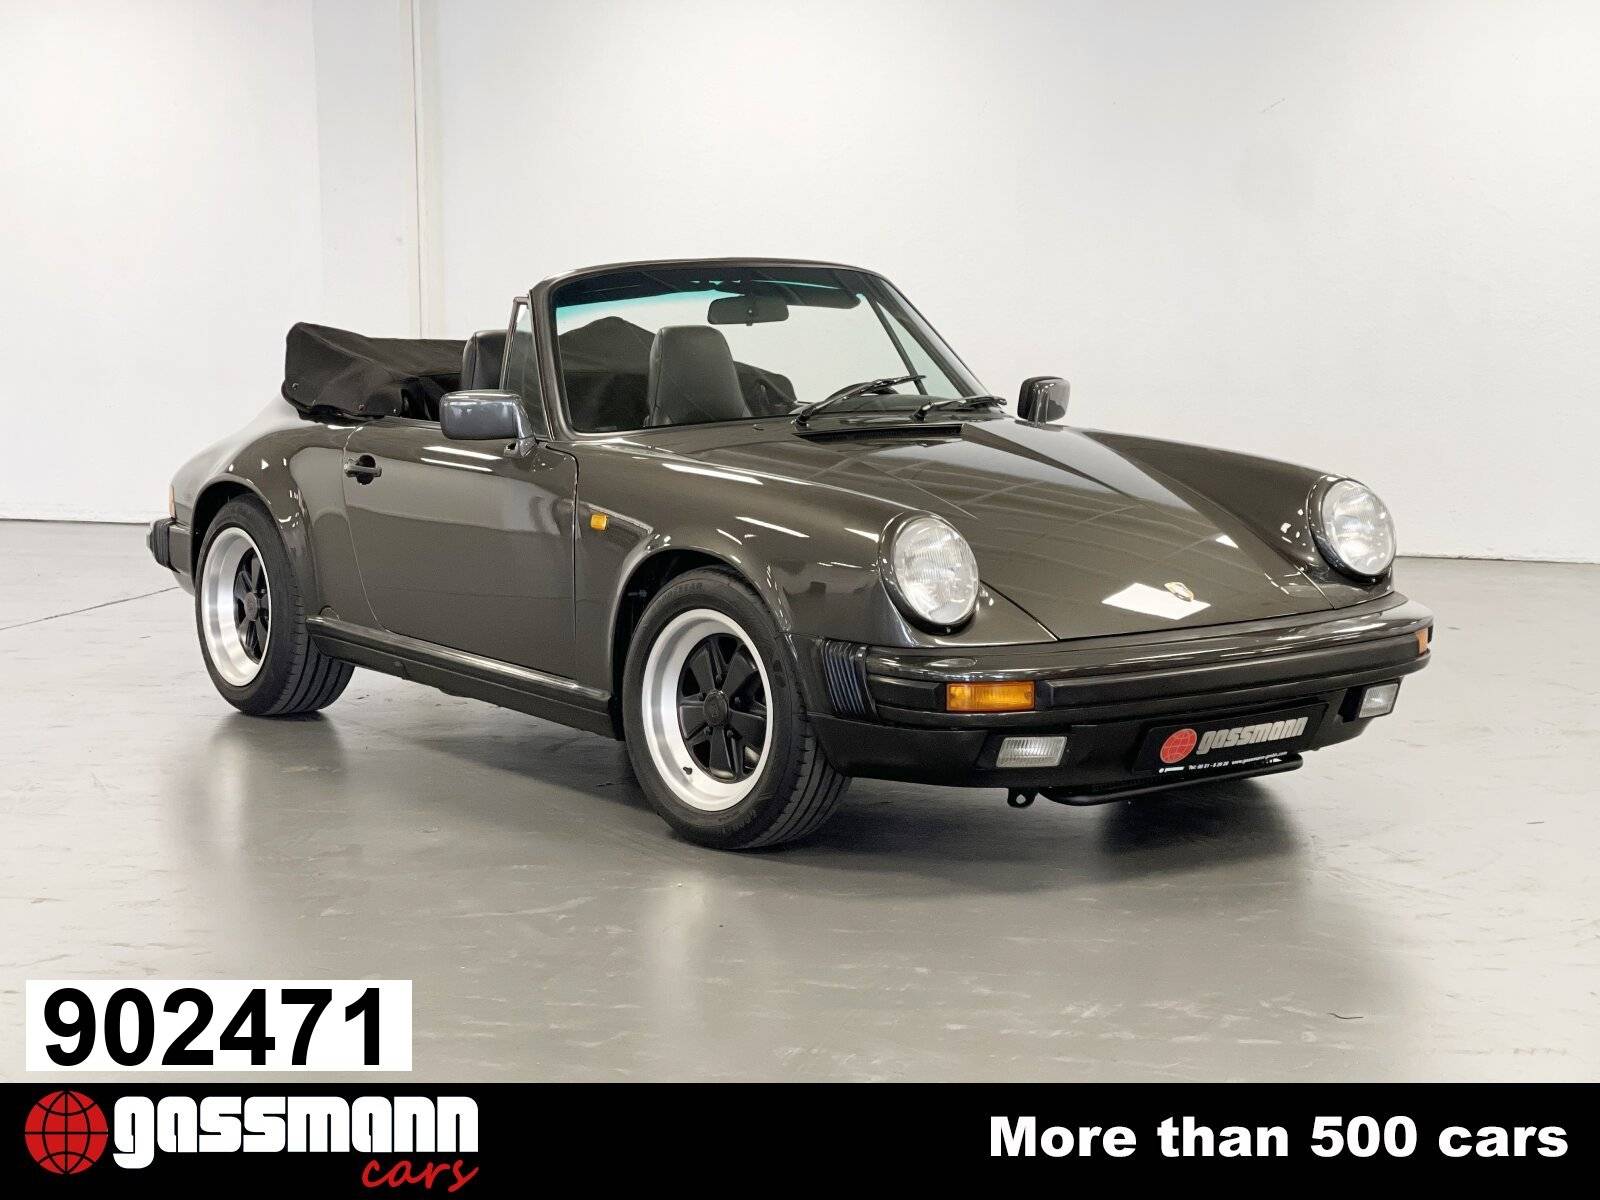 For Sale: Porsche 911 Carrera  (1989) offered for $110,952